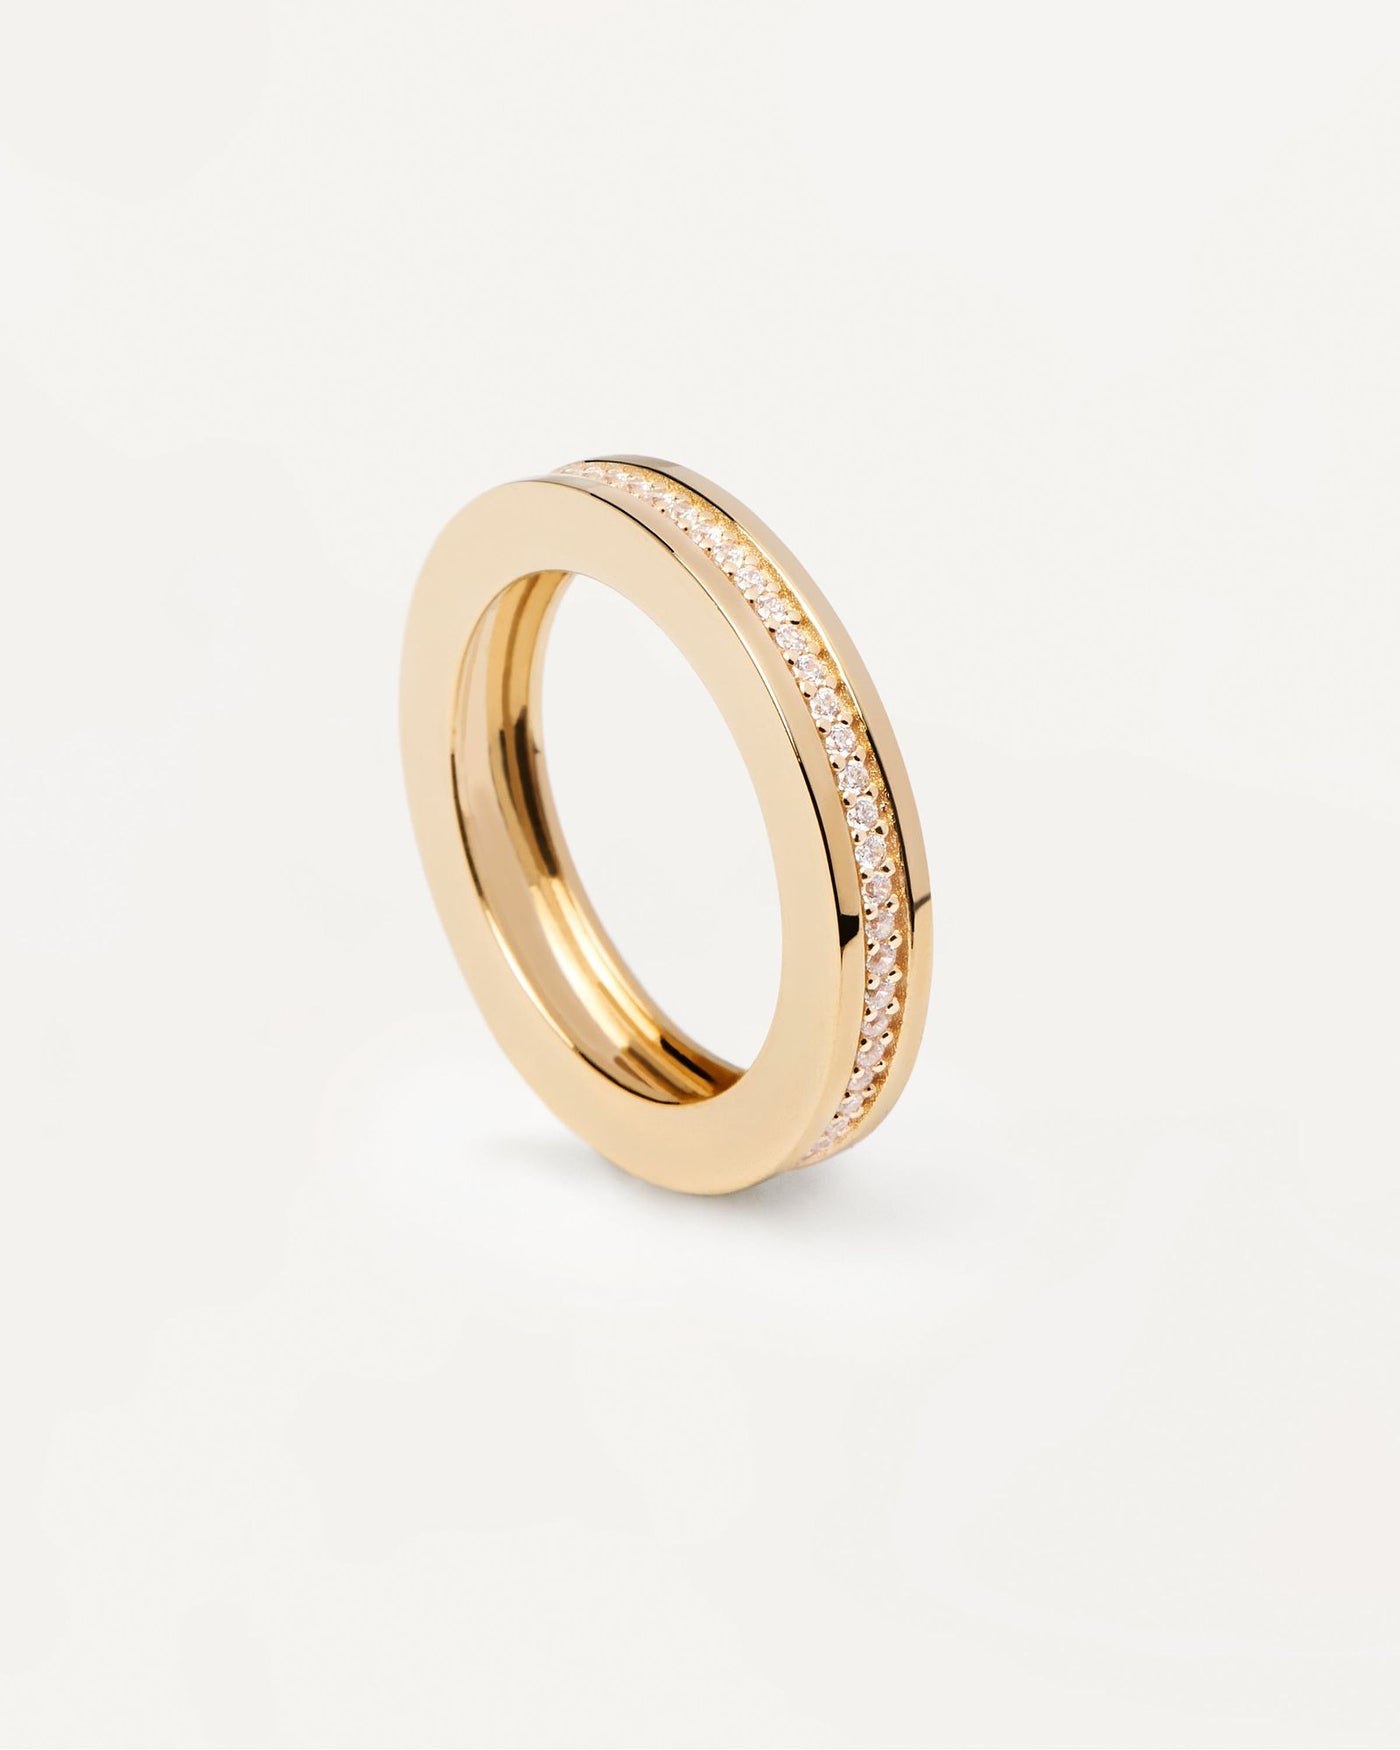 2024 Selection | Infinity Ring. Gold-plated eternity ring in disc shape. Get the latest arrival from PDPAOLA. Place your order safely and get this Best Seller. Free Shipping.